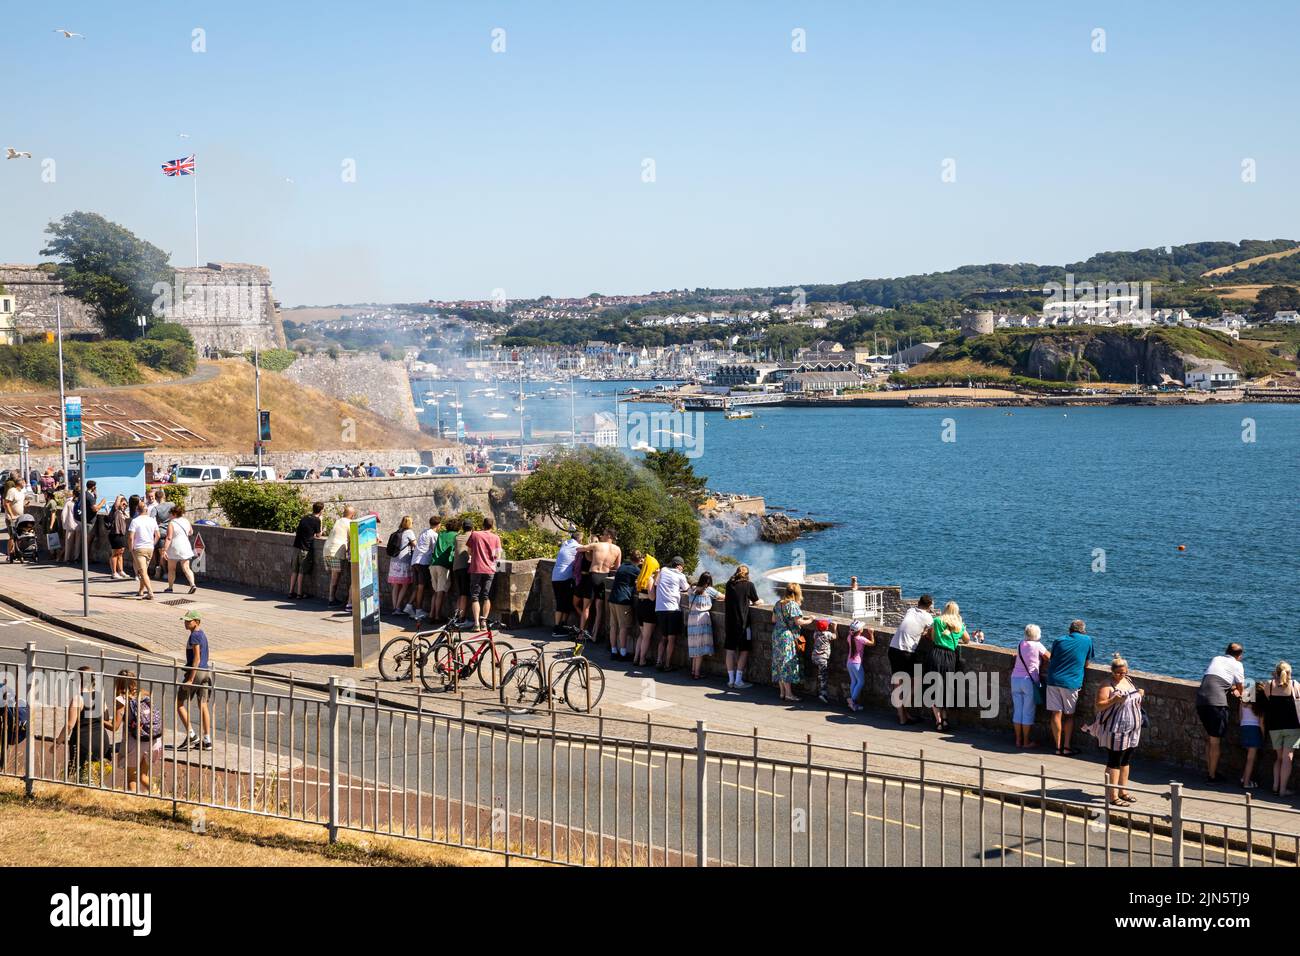 A view across the Hoe in Plymouth on a hot sunny Day Stock Photo